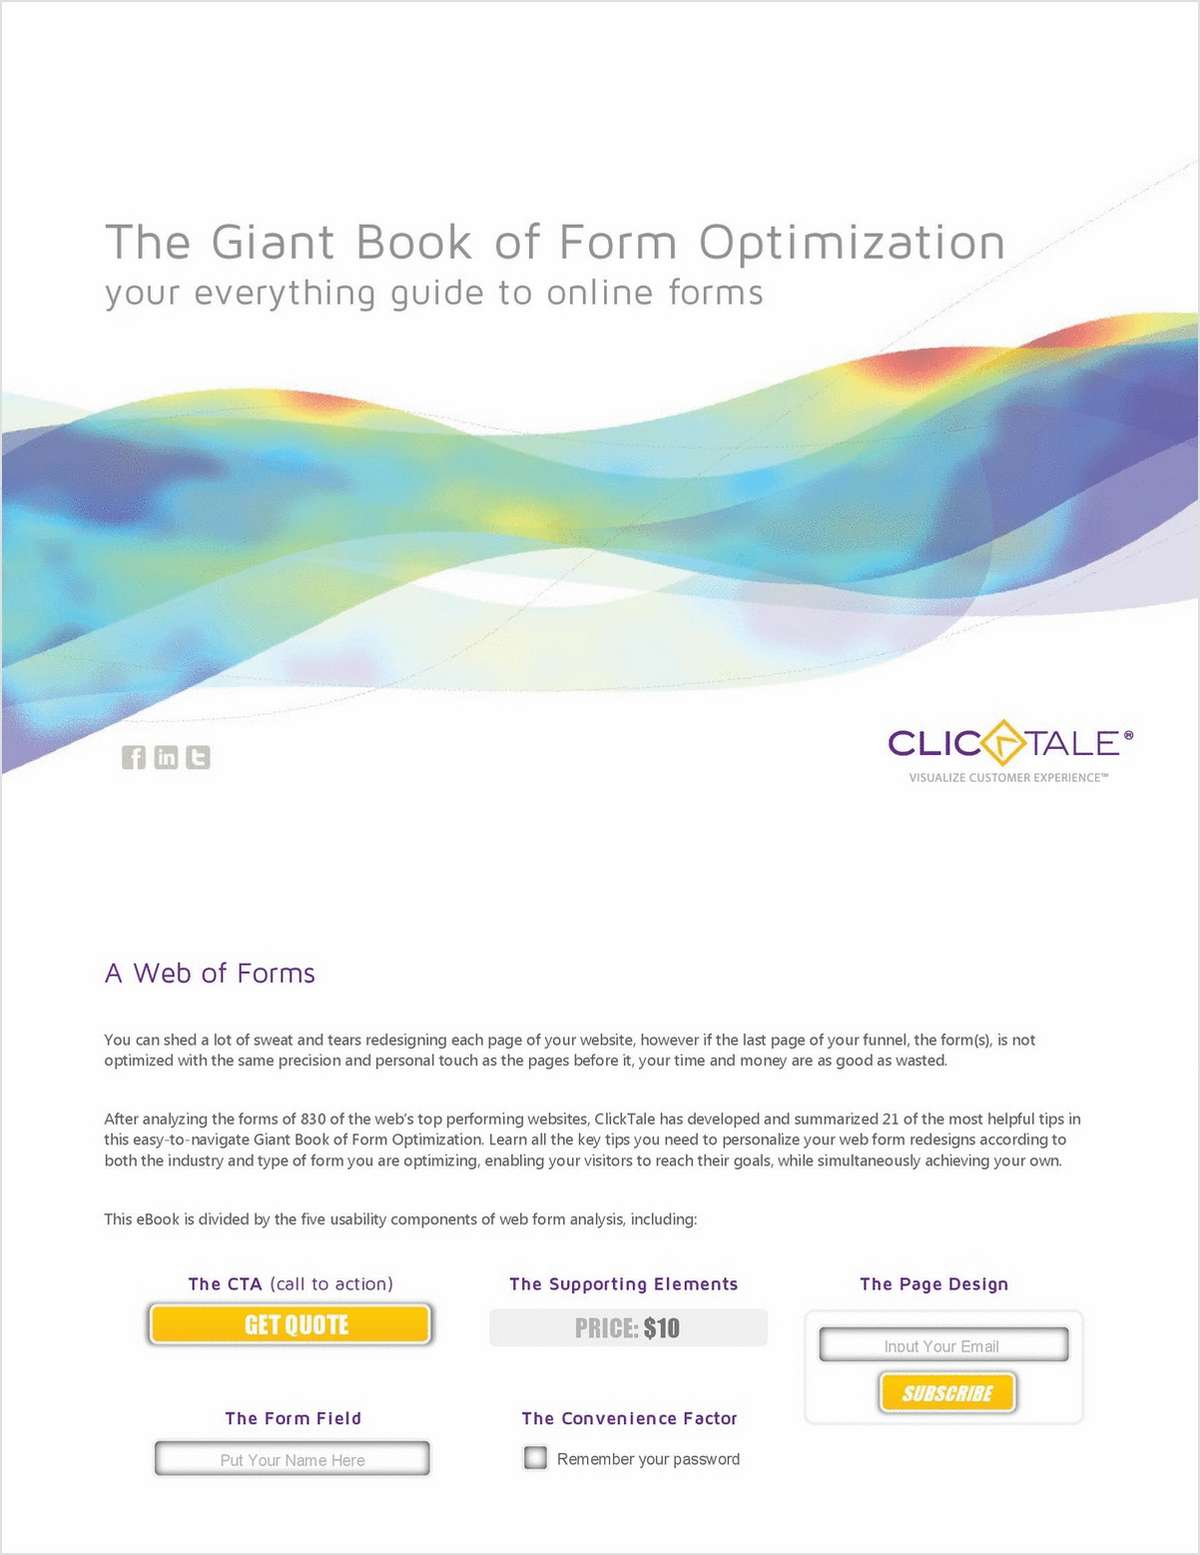 The Giant Book of Form Optimization